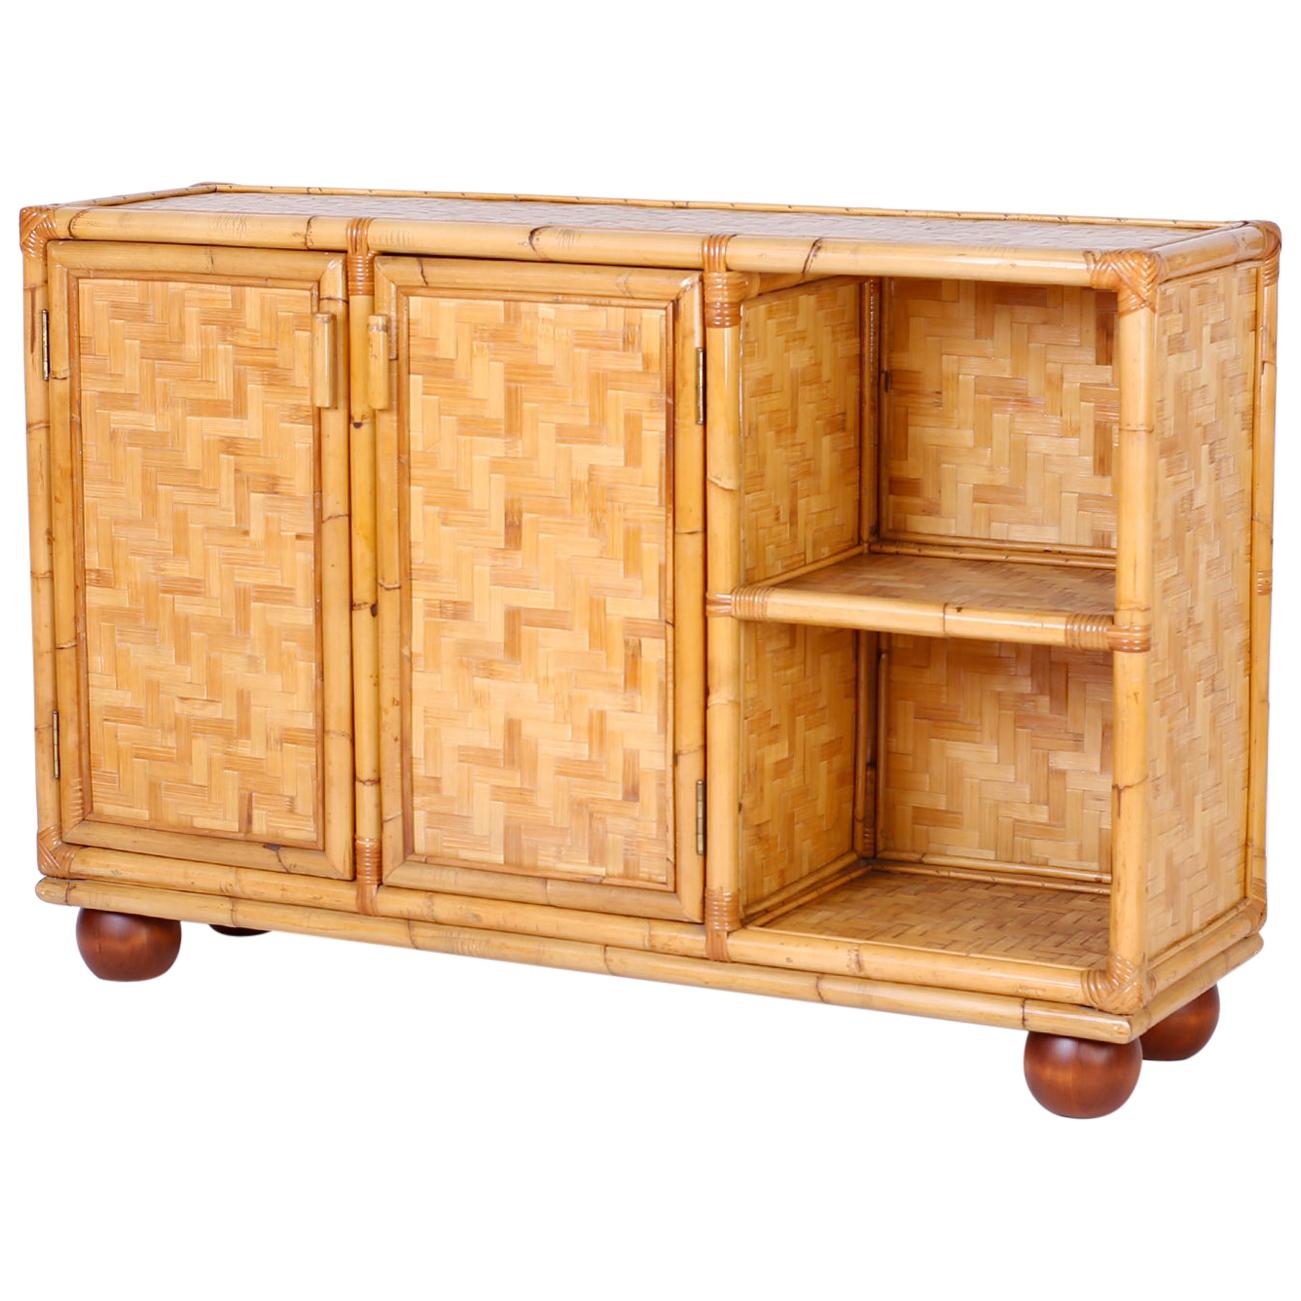 Midcentury Bamboo and Wicker Cabinet or Server